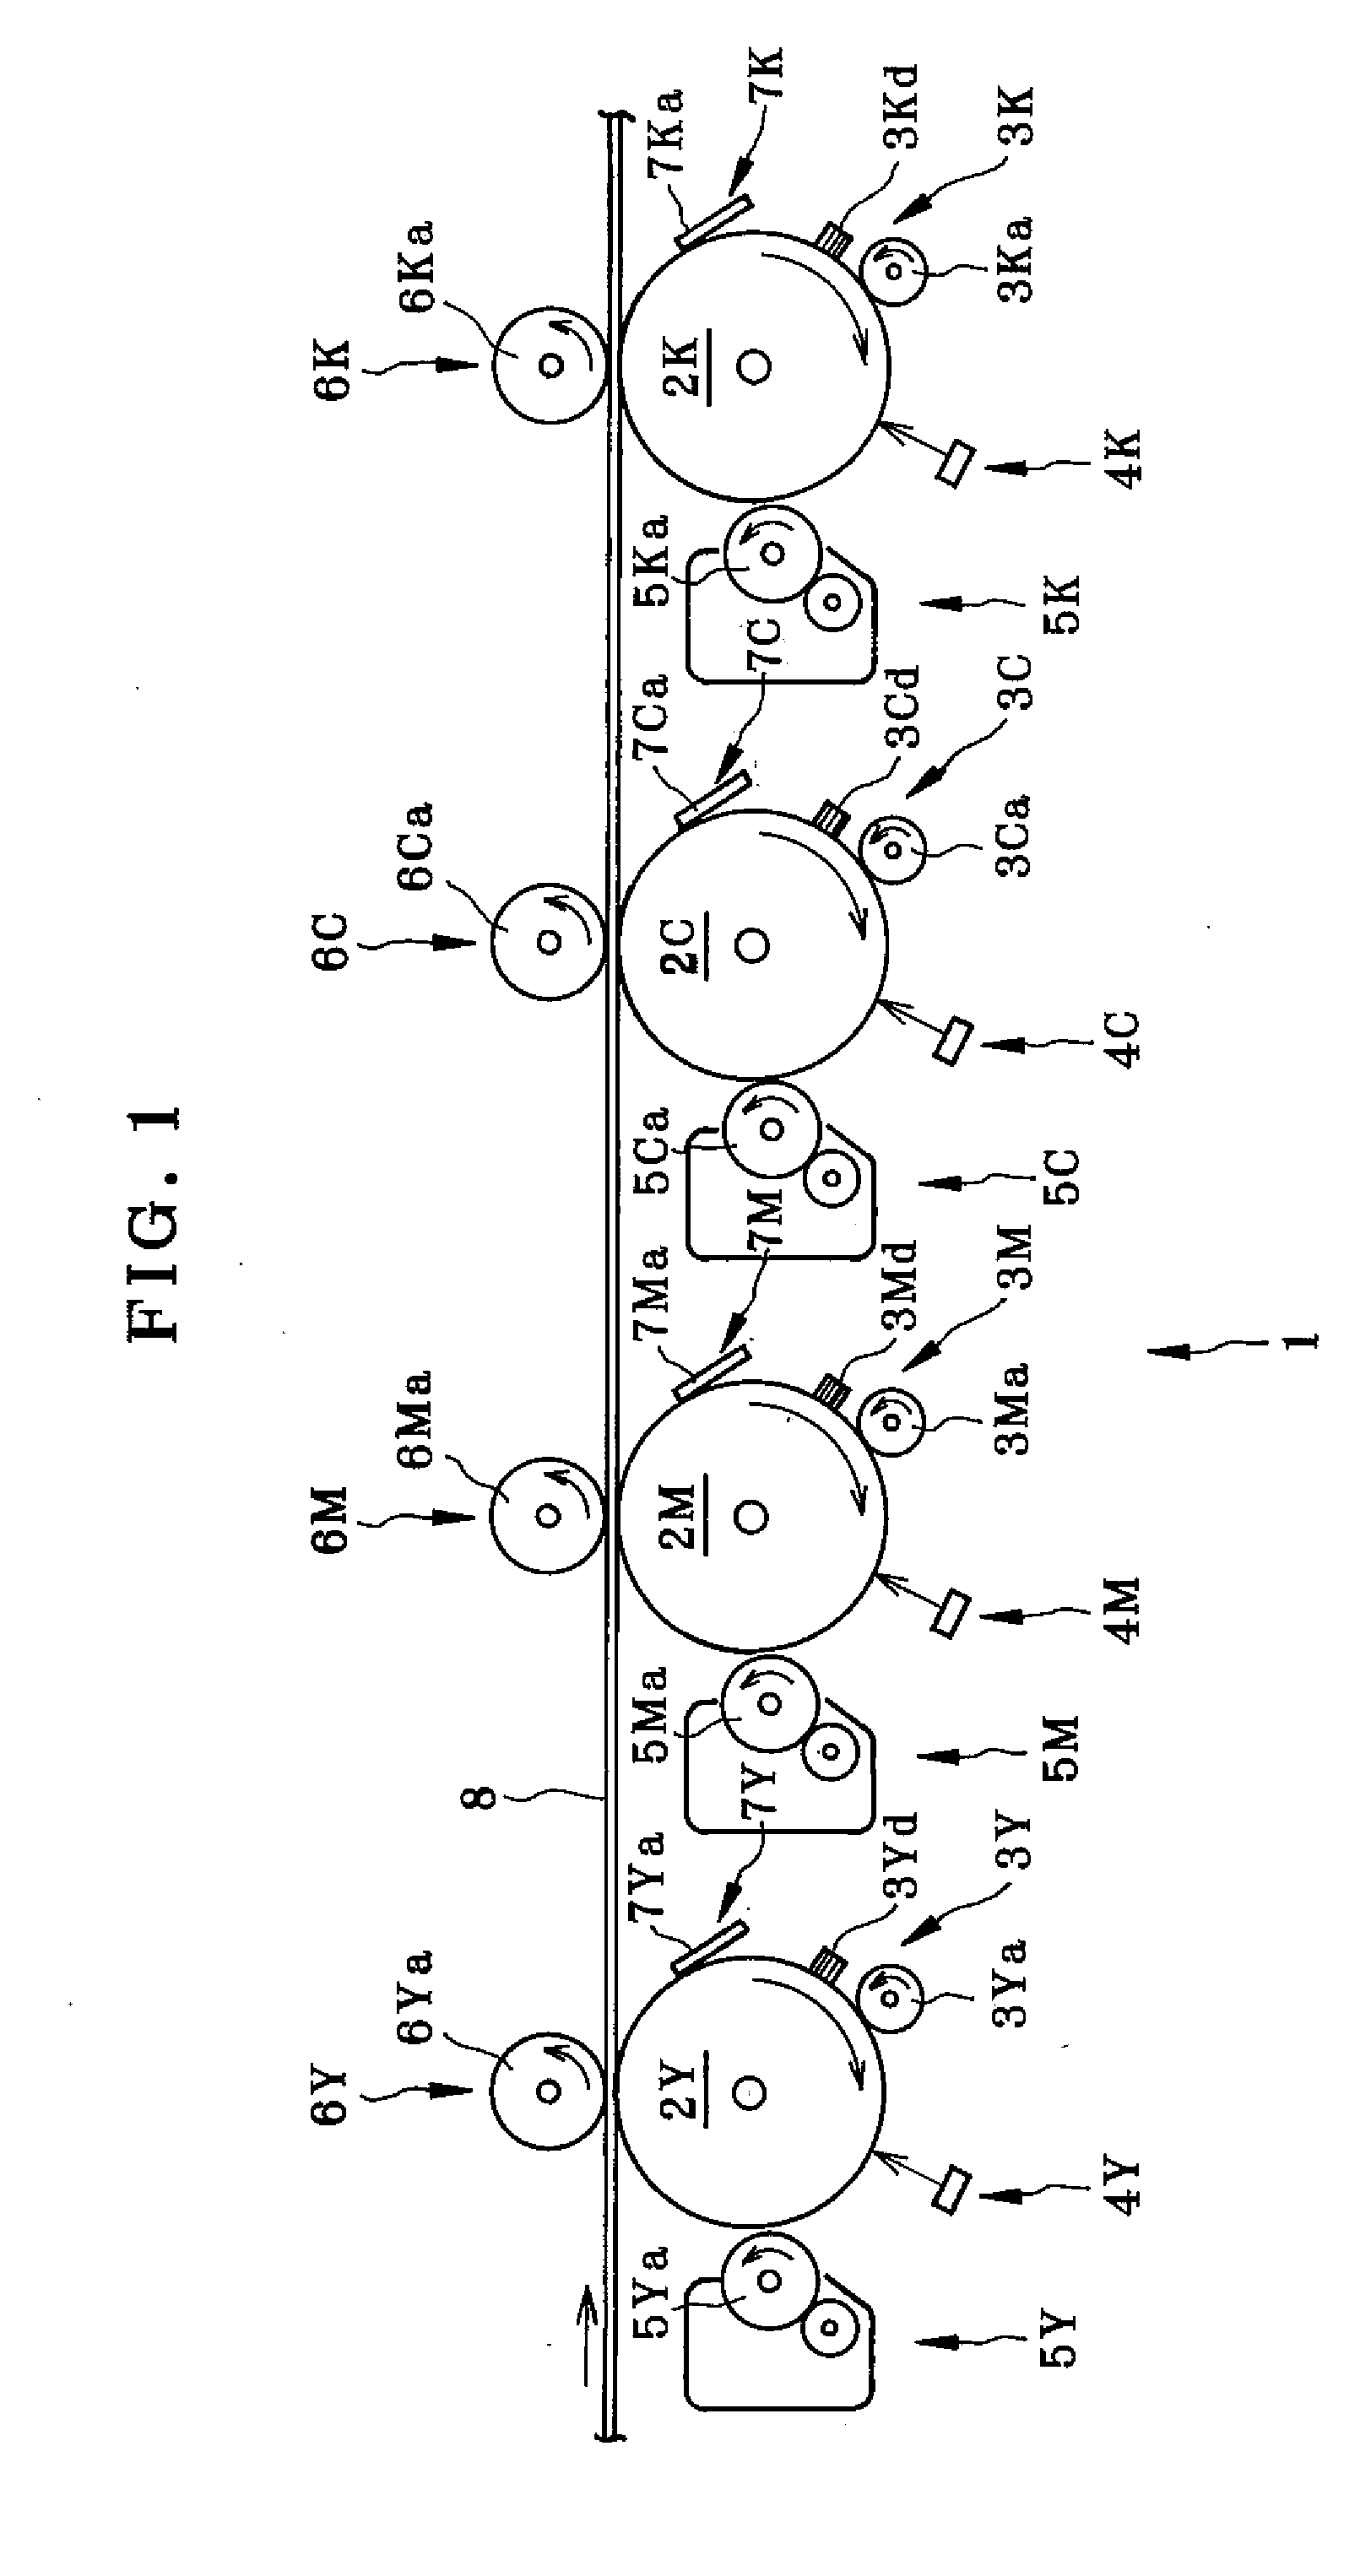 Charger, Image Forming Apparatus, and Charge Control Method